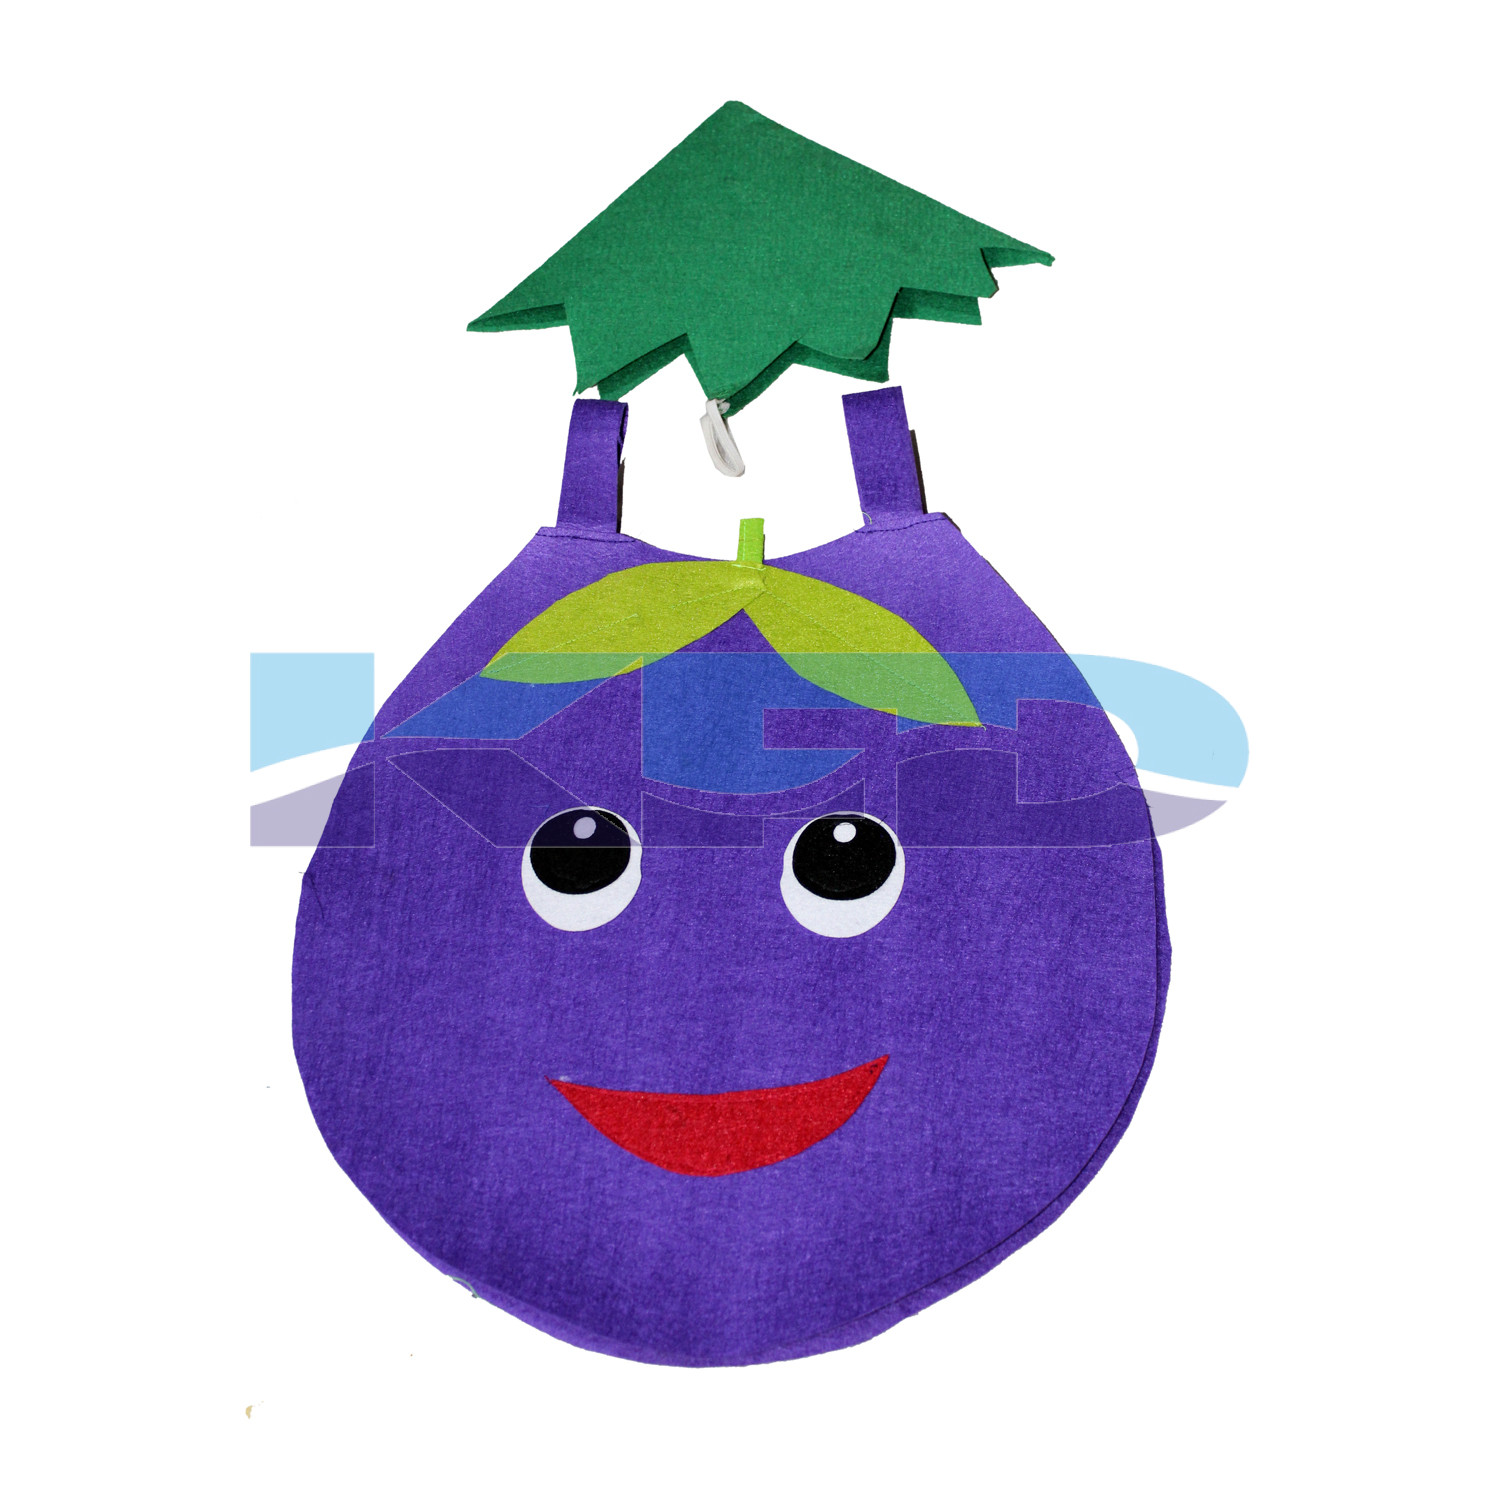  Brinjal Vegetables Costume only cutout with Cap for Annual function/Theme Party/Competition/Stage Shows/Birthday Party Dress